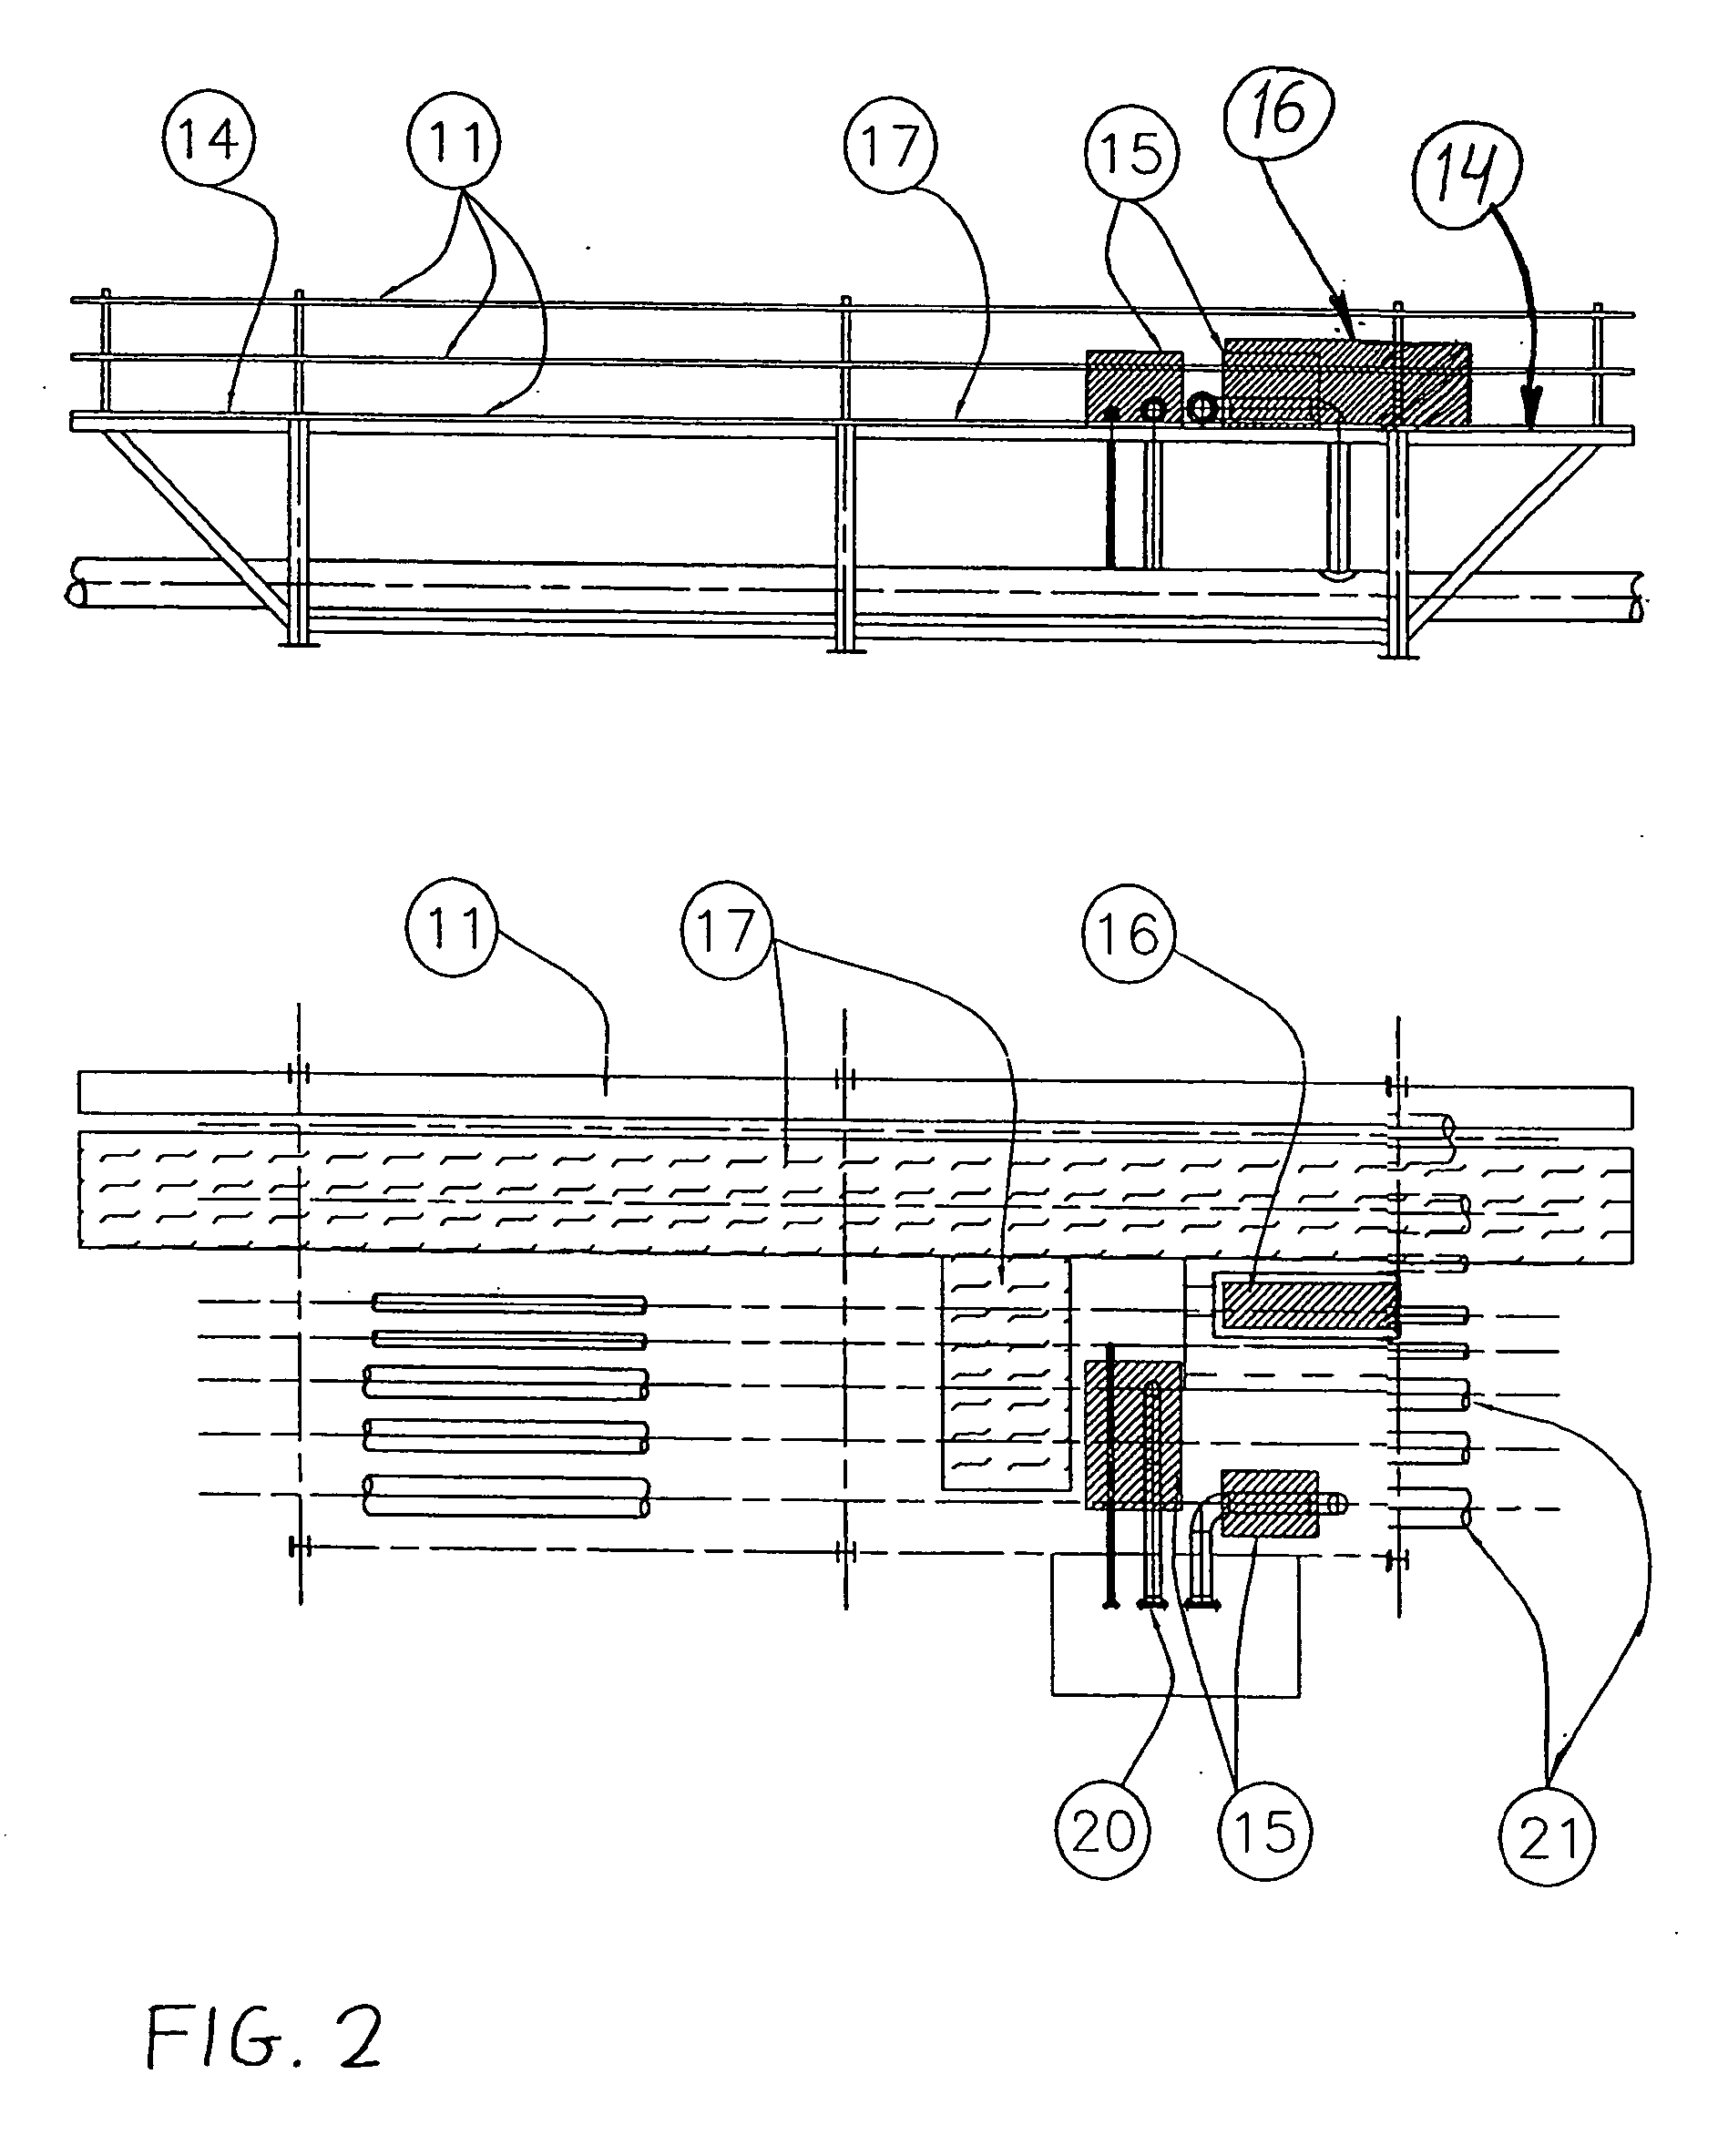 System and method for steam-assisted gravity drainage (SAGD)-based heavy oil well production